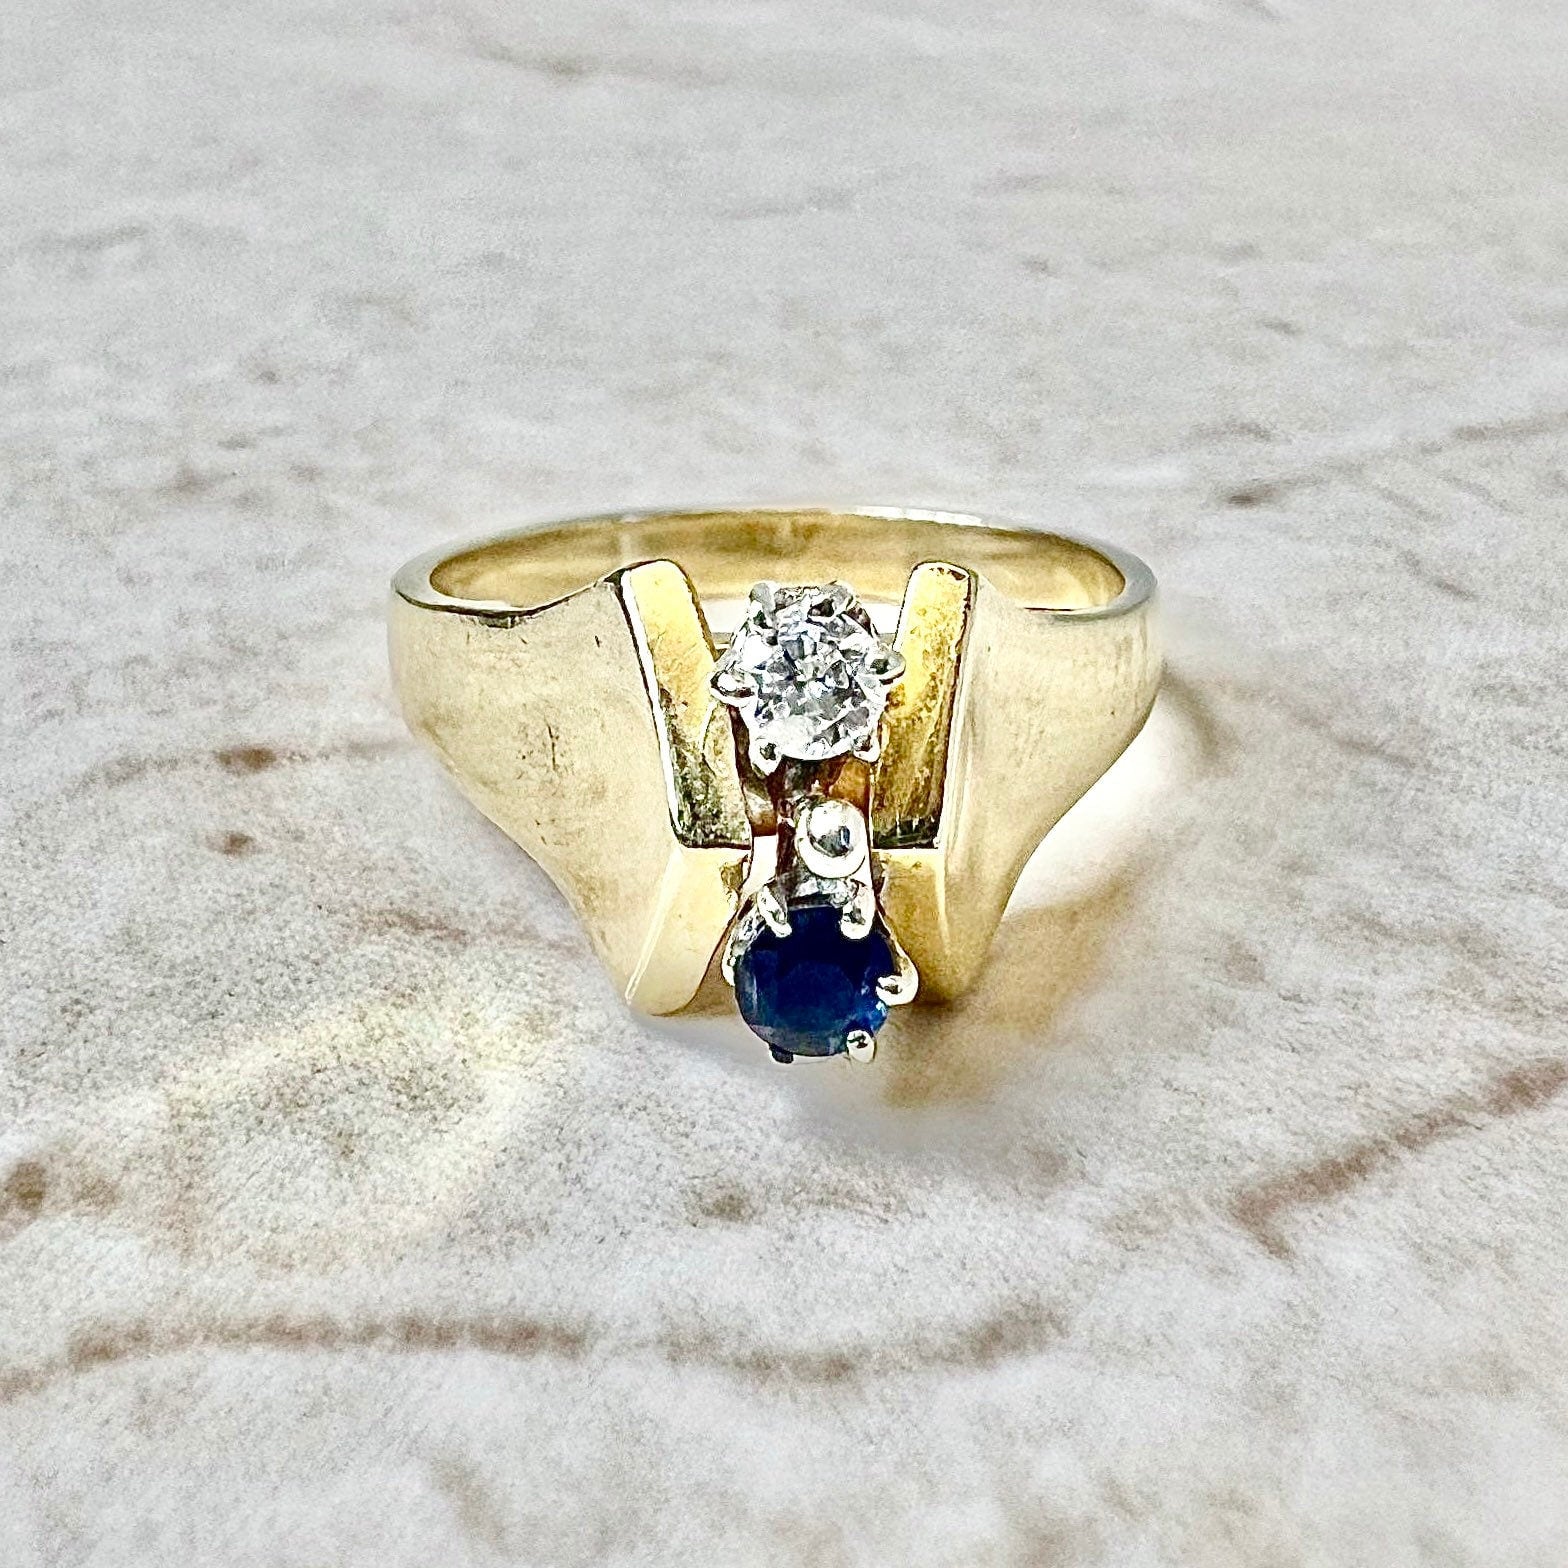 Vintage 14K Sapphire & Diamond Ring - Yellow And White Gold Cocktail Ring - Sapphire Ring - April September Birthstone - Best Gifts For Her